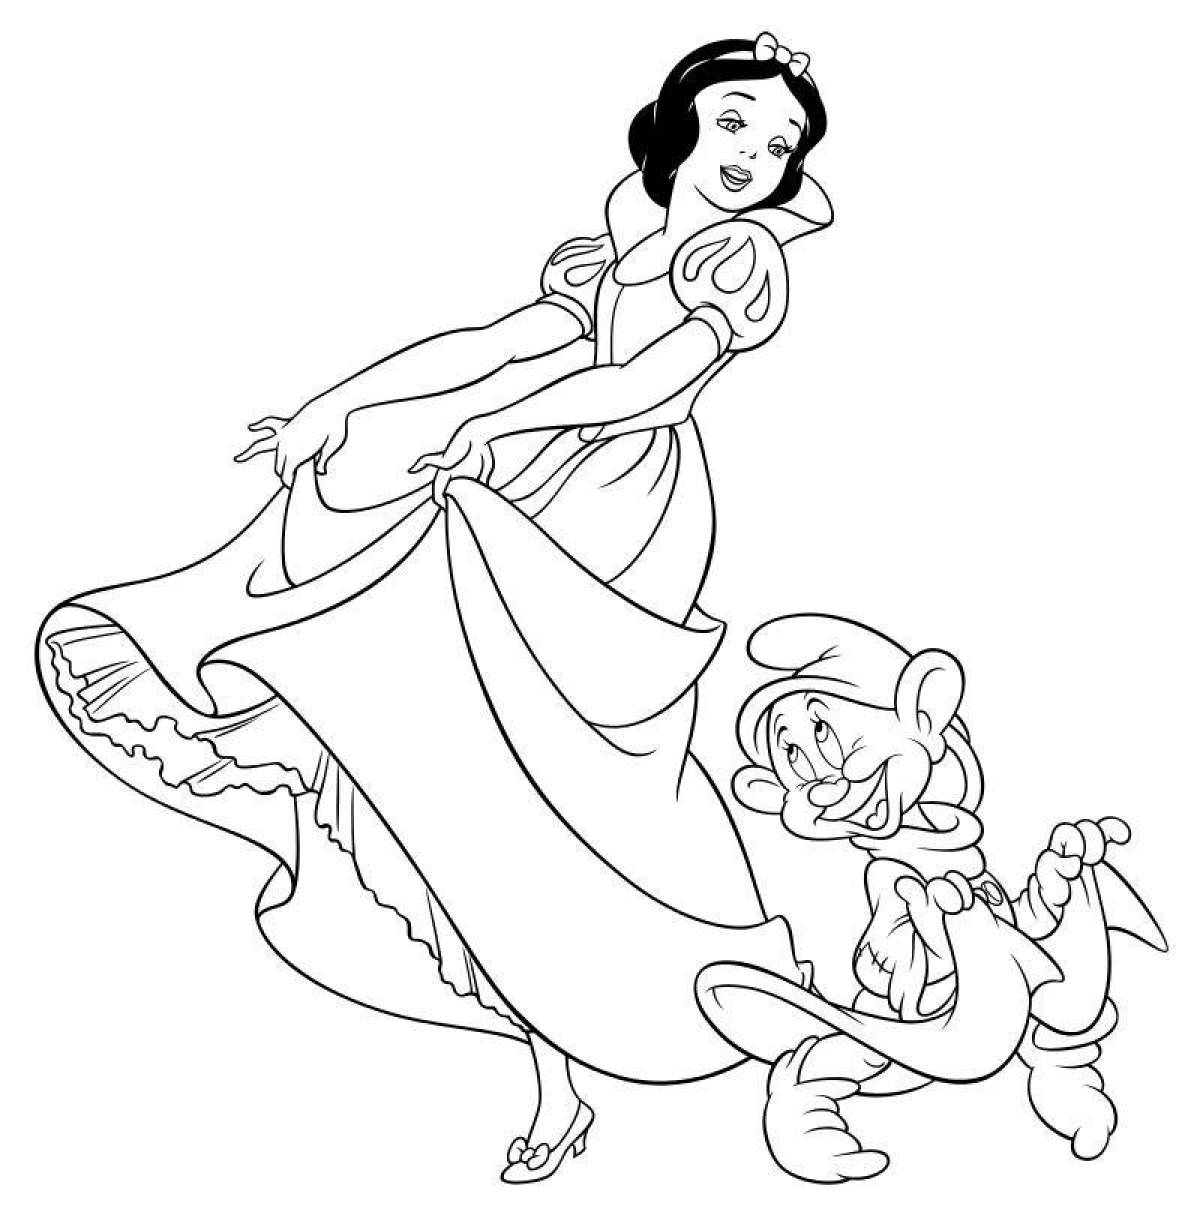 Coloring page joyful snow white and 7 dwarfs